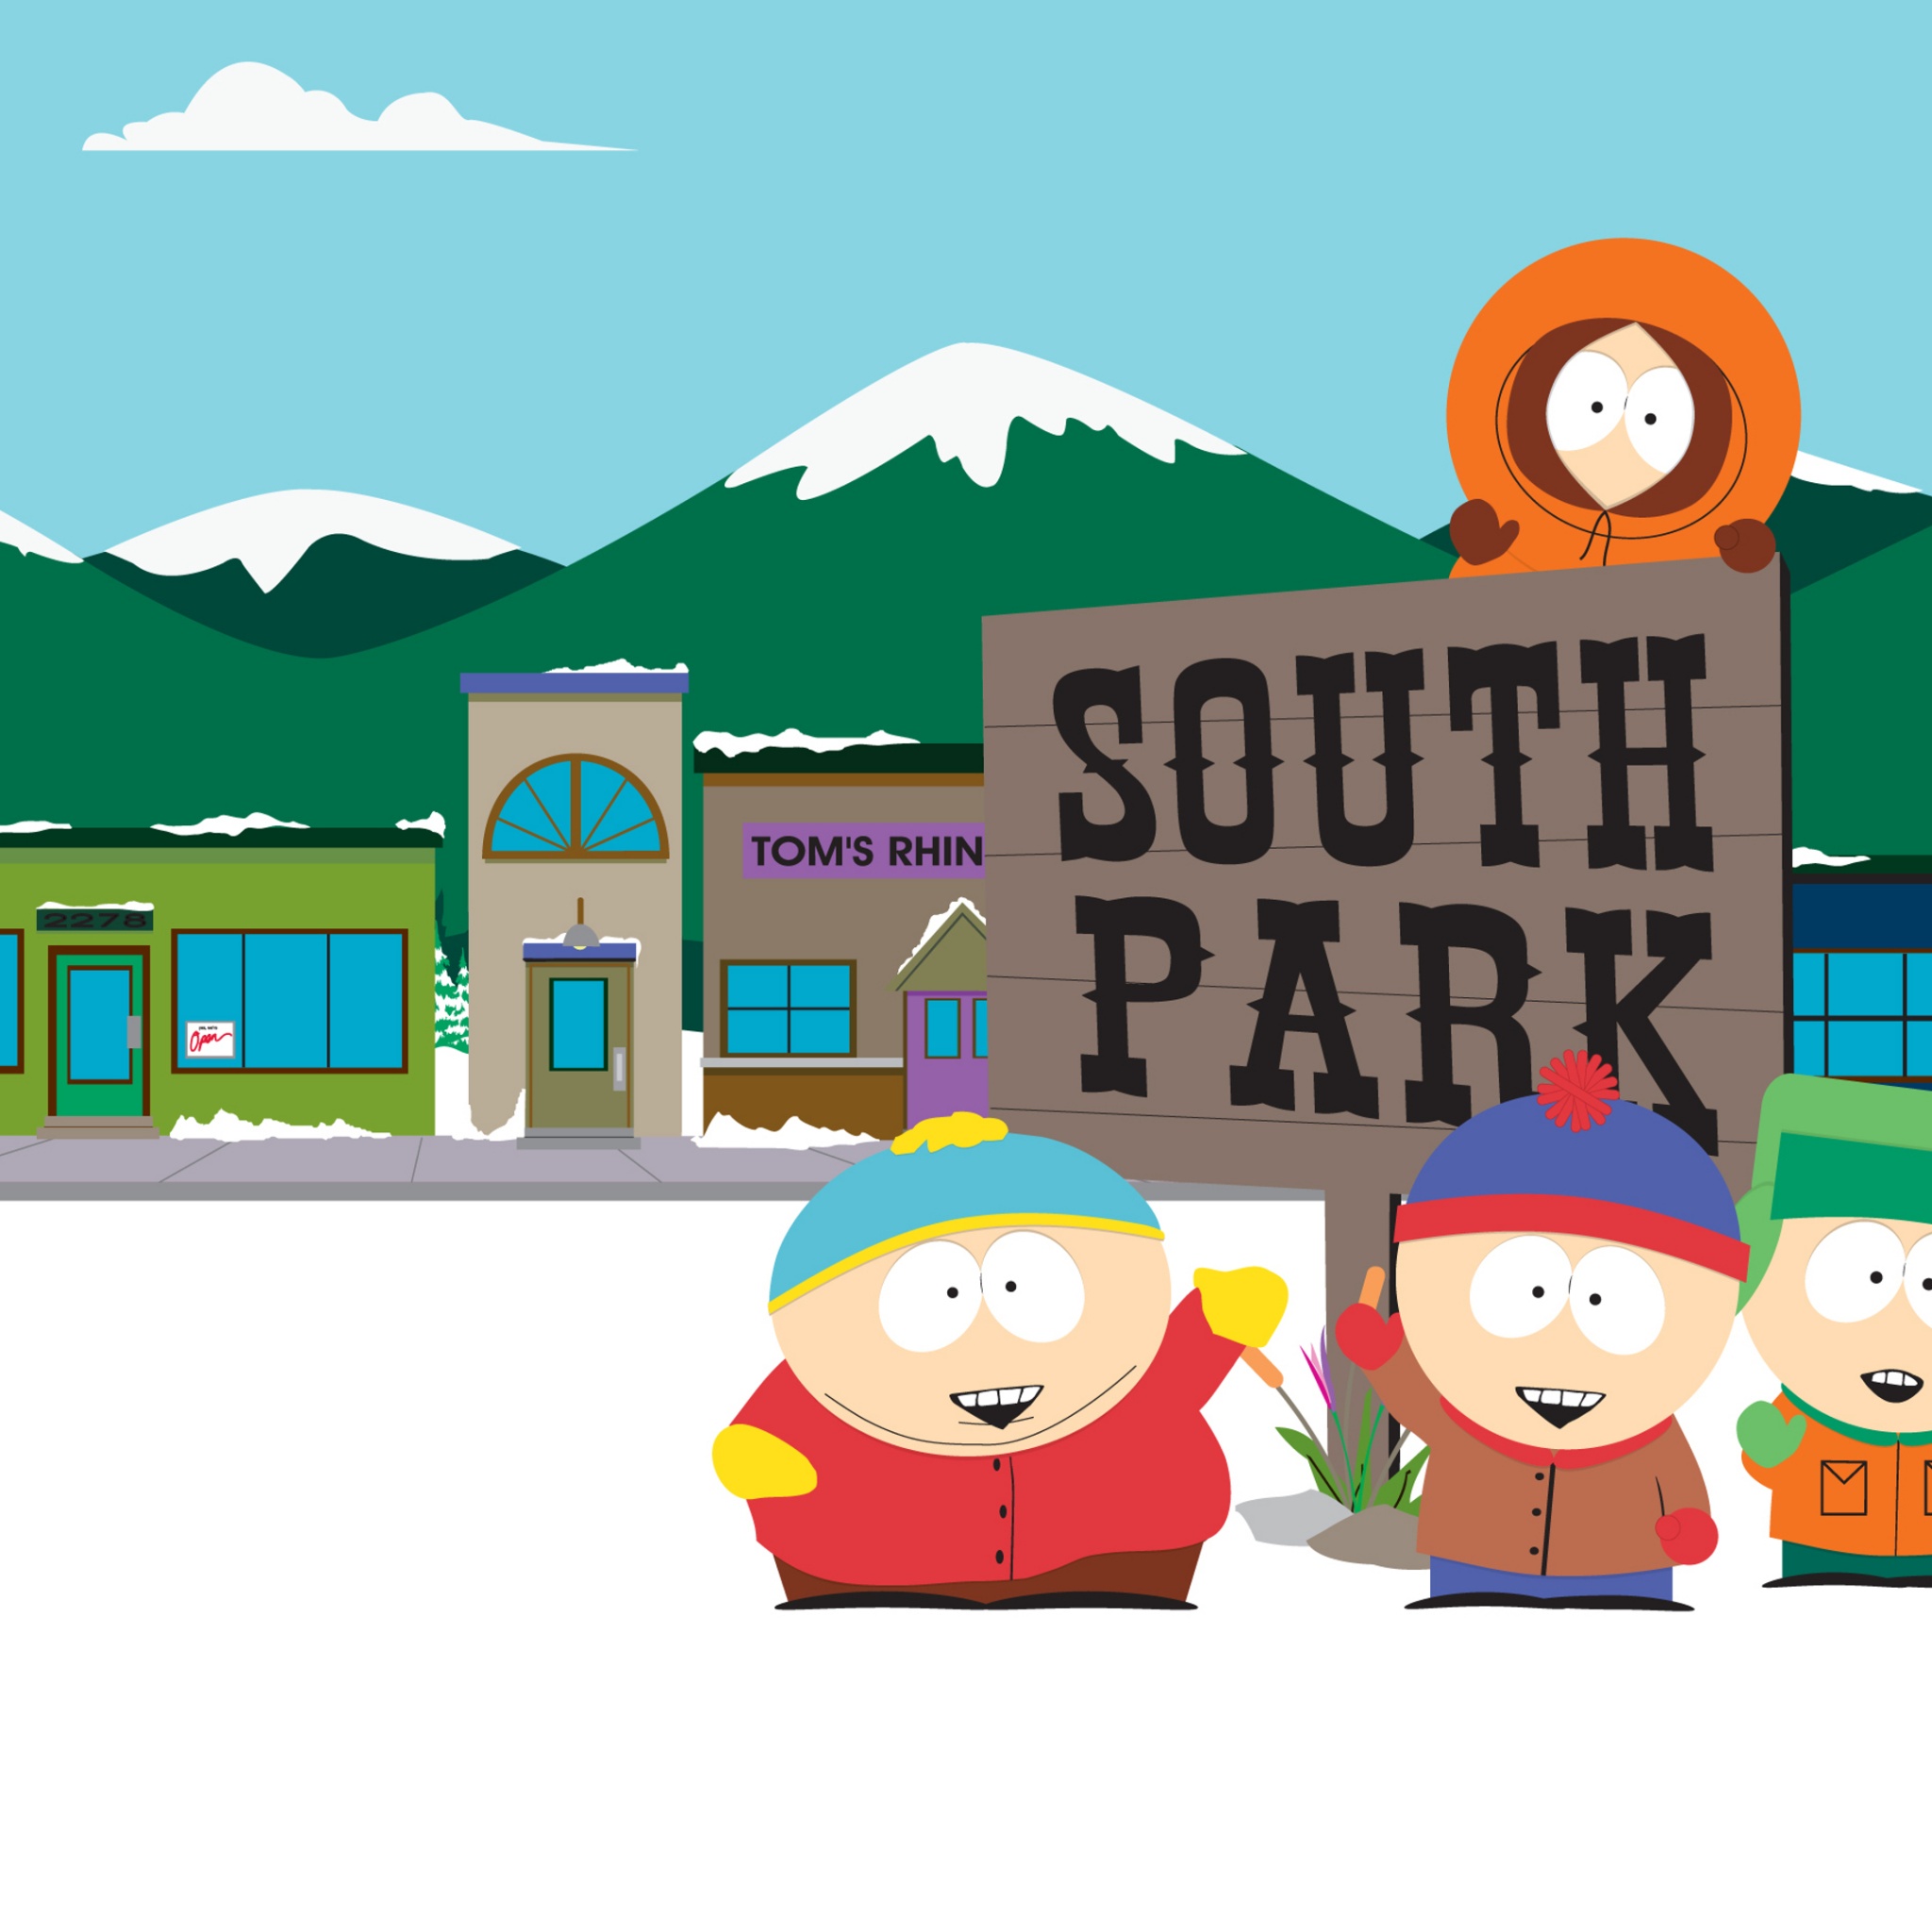 South park on steam фото 49